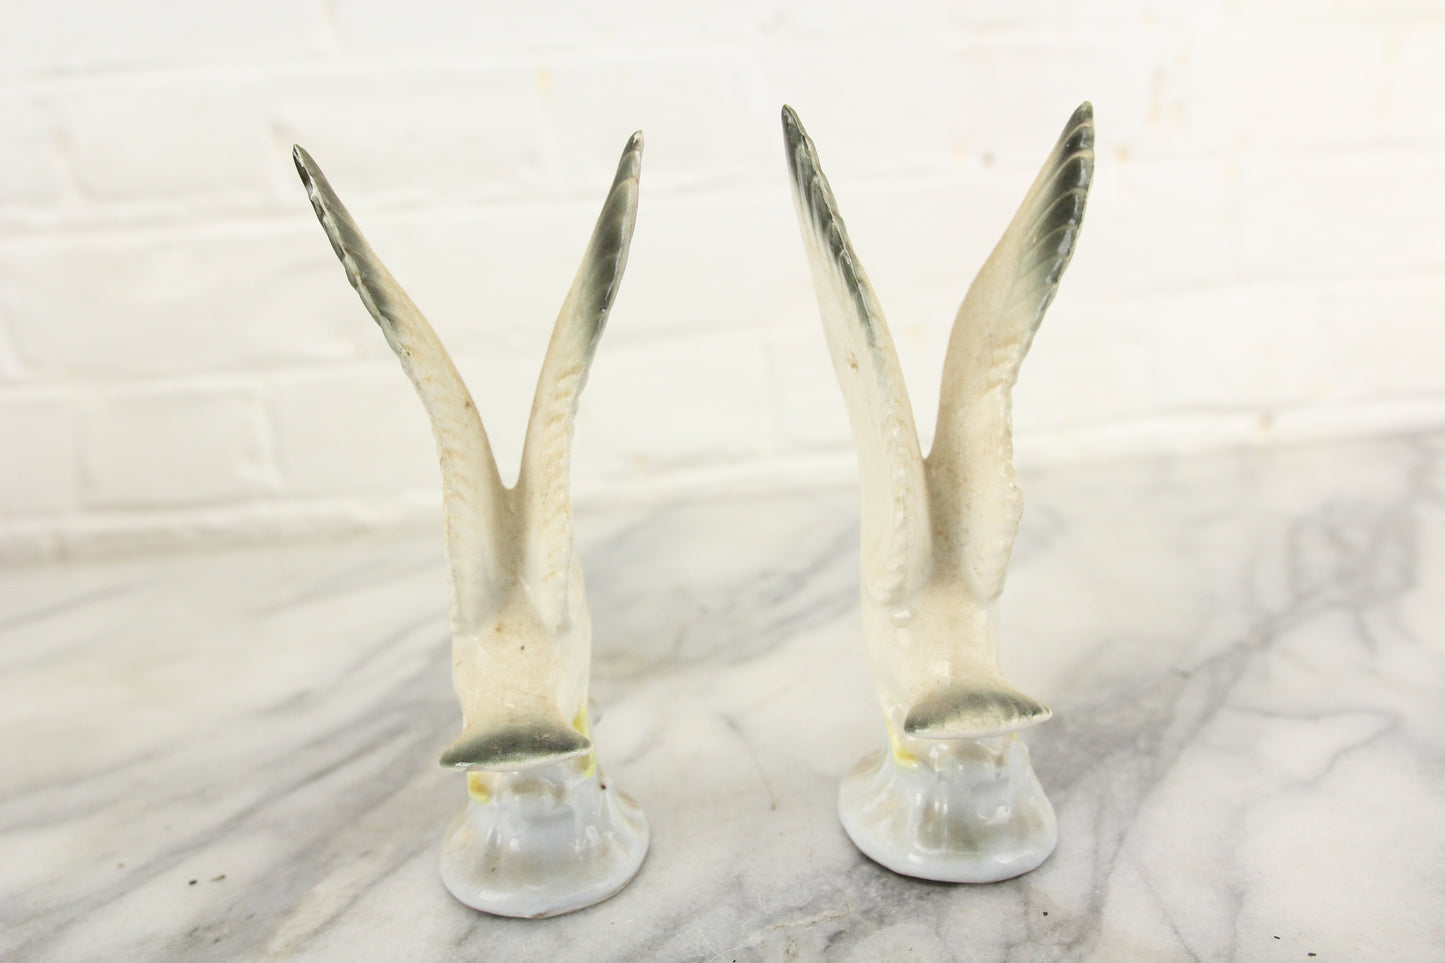 Seagulls Porcelain Salt and Pepper Shakers, Made in Japan